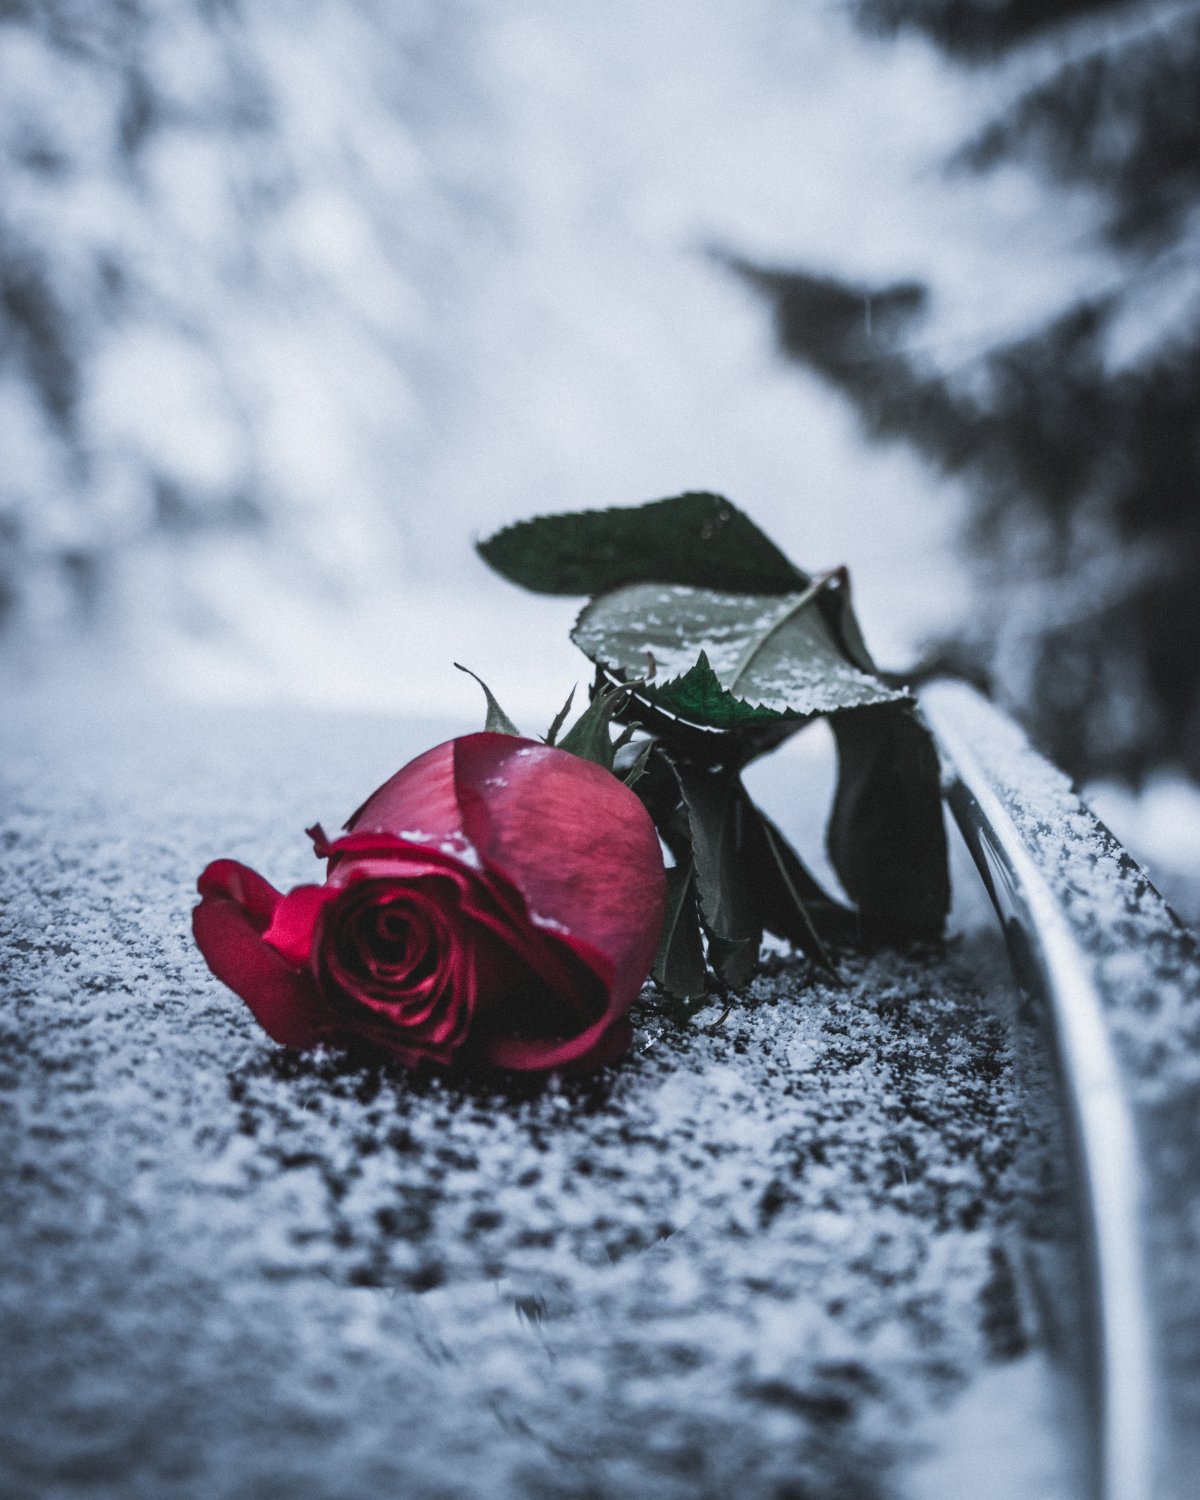 Sad pictures of roses